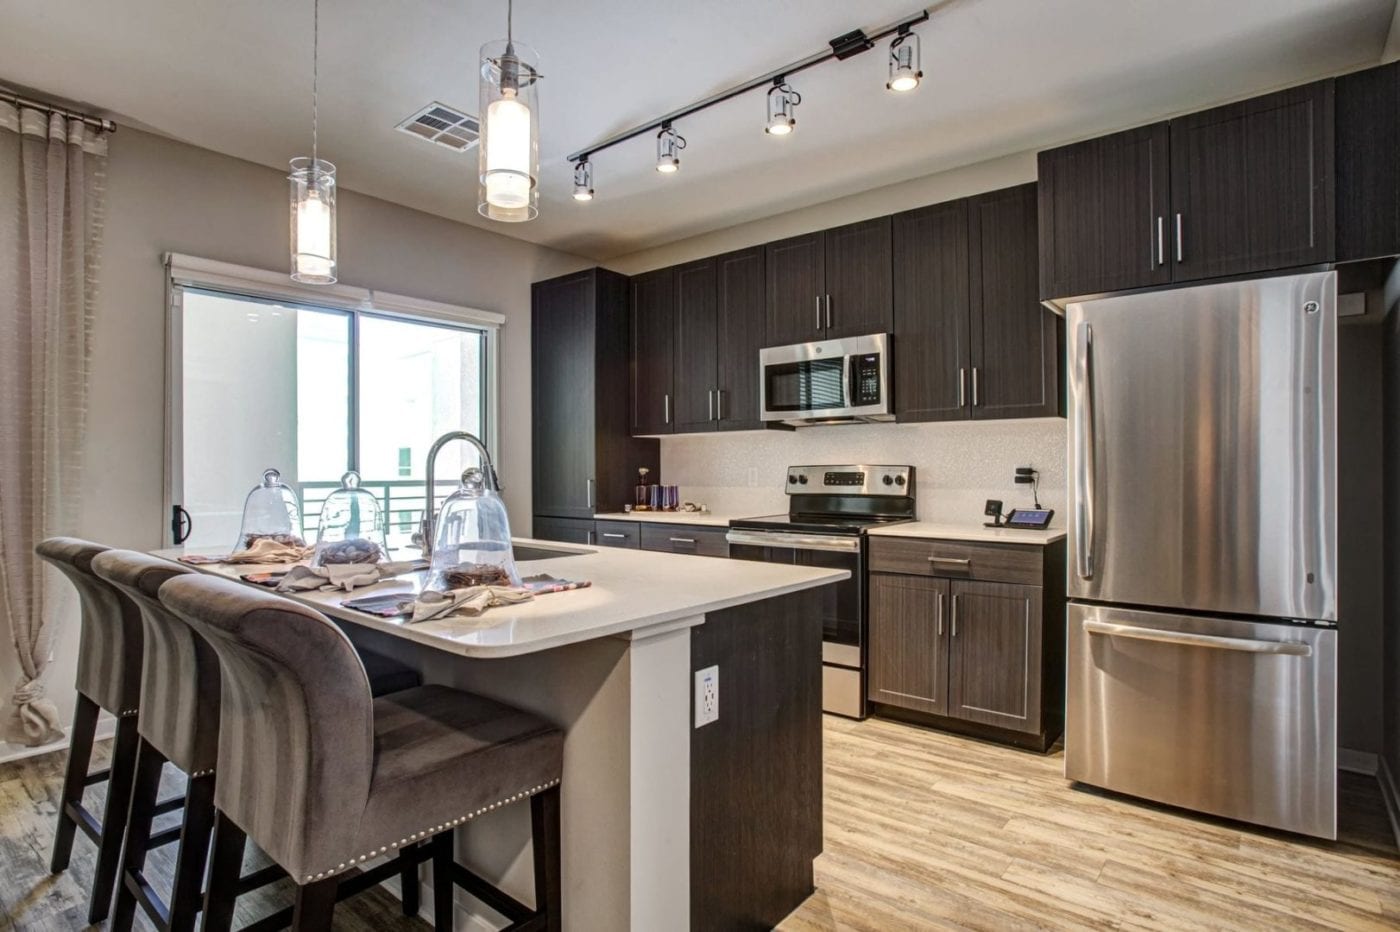 Phoenix, AZ Apartments for Rent - Large Open-Concept Kitchen with Island, Dark Cabinets, Wood Flooring and Stainless Steel Appliances.